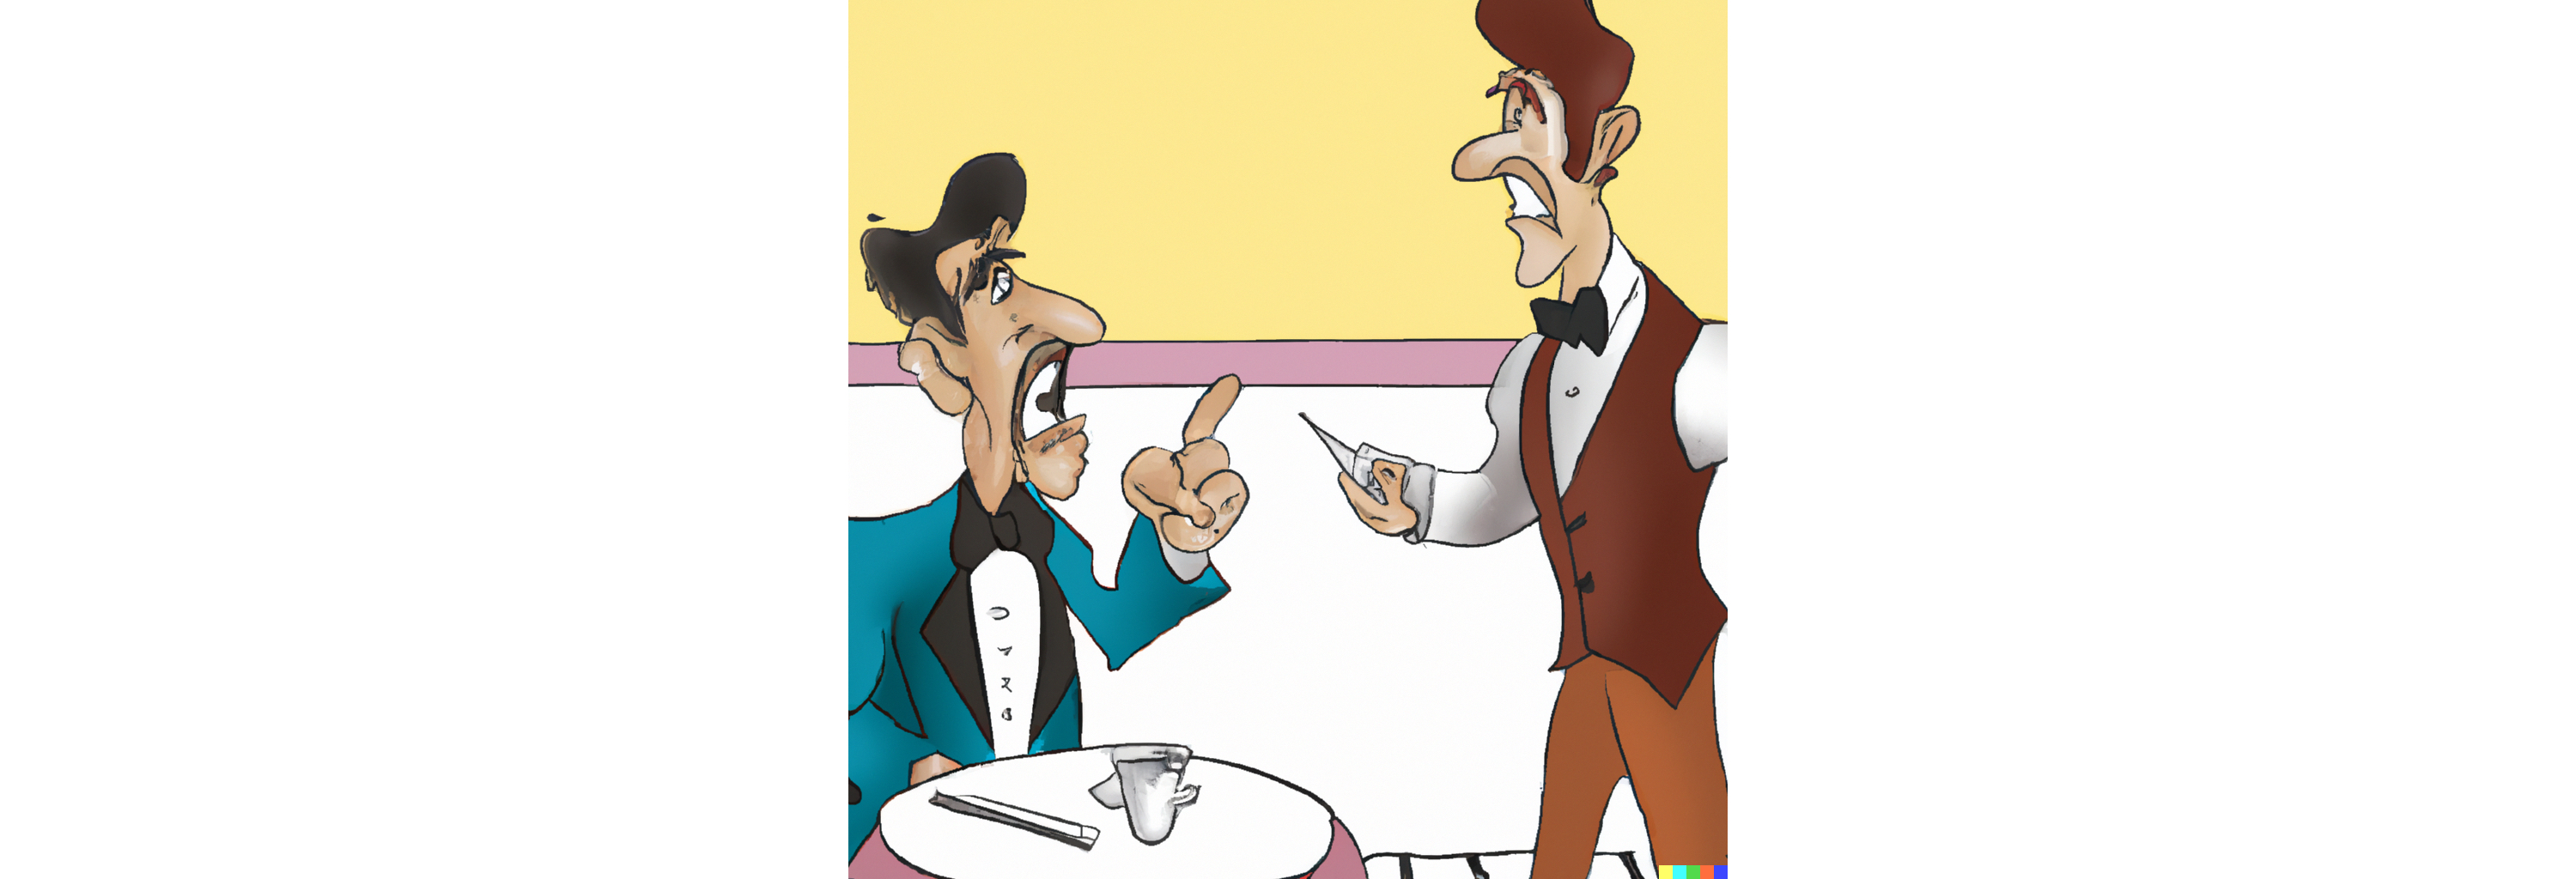 An angry exchange between a diner and a waiter. Cartoon-style image created with the assistance of DALL-E-2.